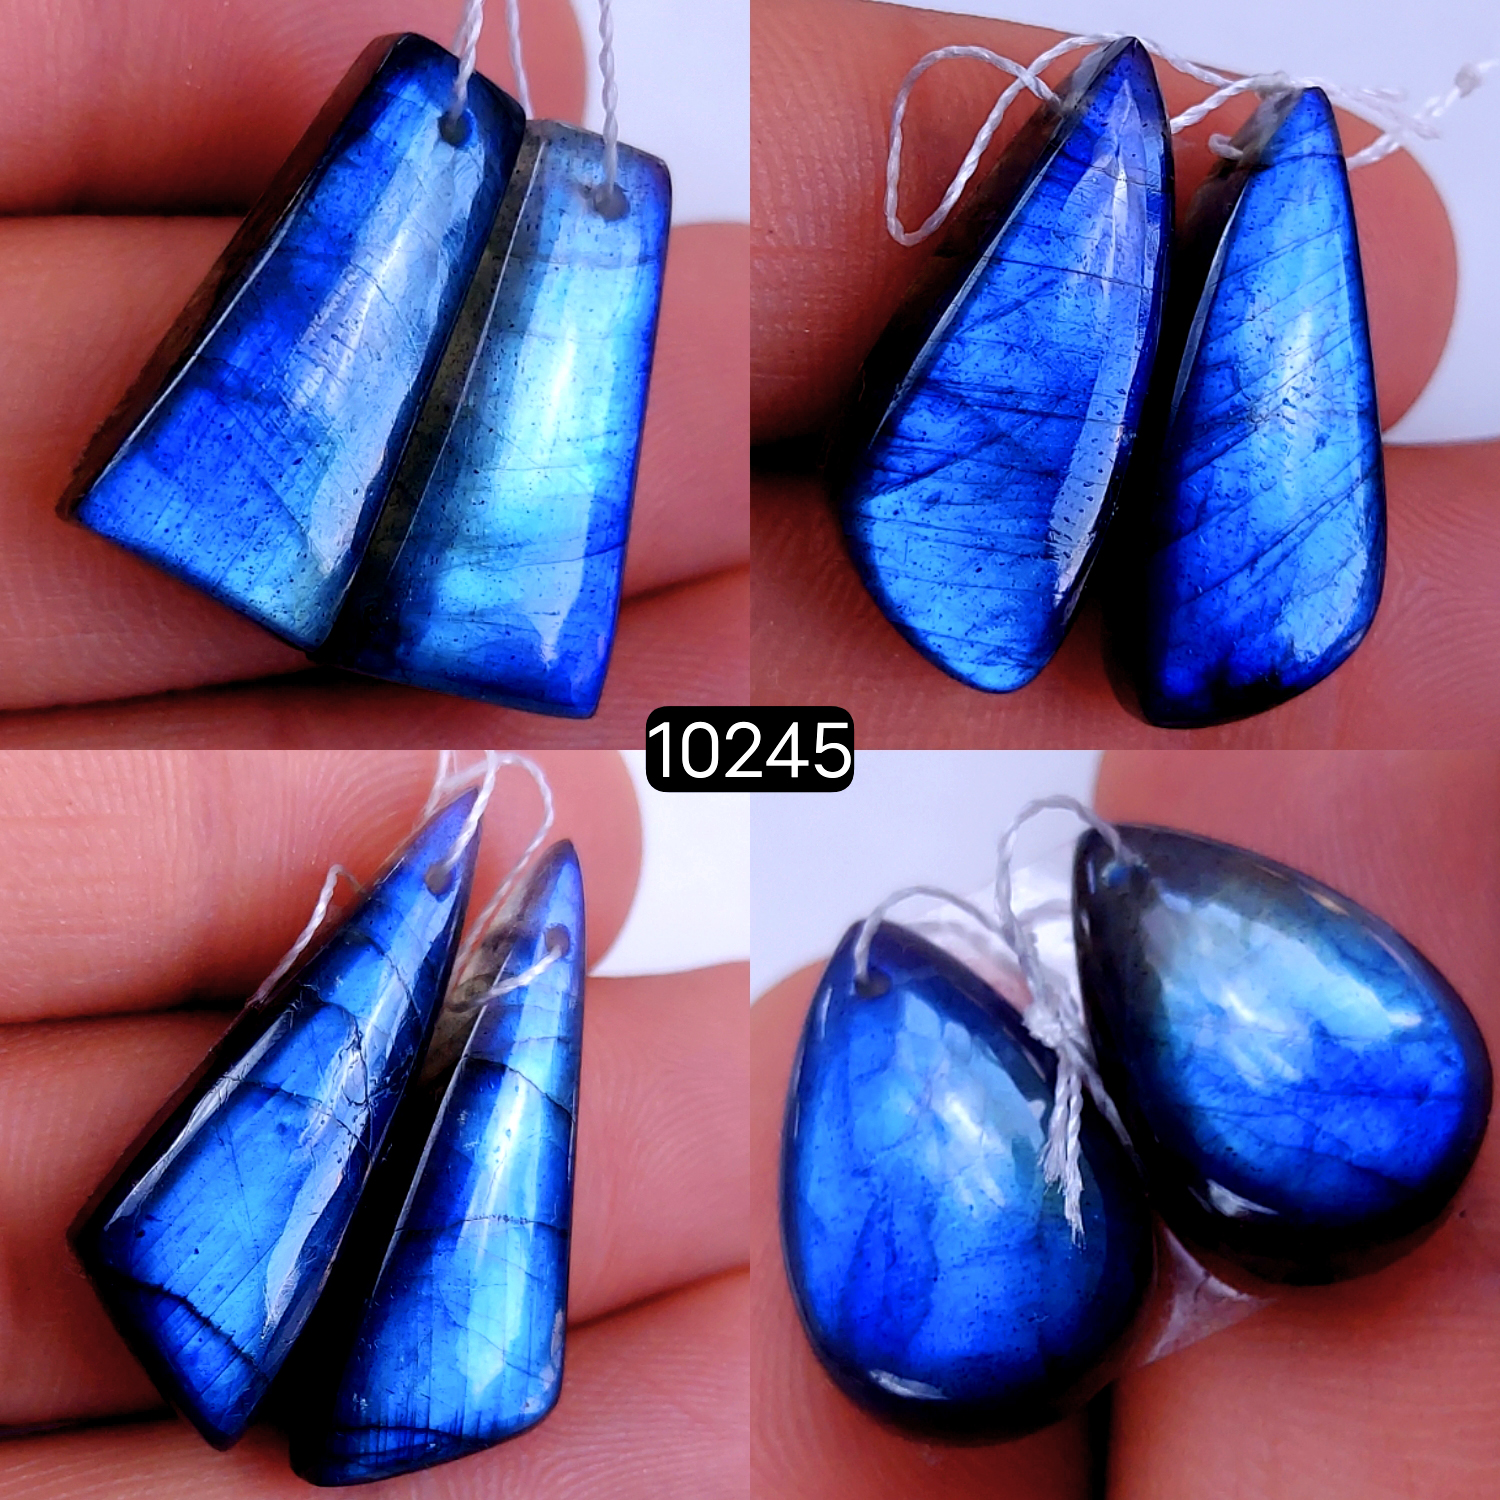 4Pair 89Cts Natural Labradorite Crystal Drill Dangle Drop Earring Pairs Silver Earrings Blue Labradorite Hoop Jewelry  30x10 18x10mm #10245